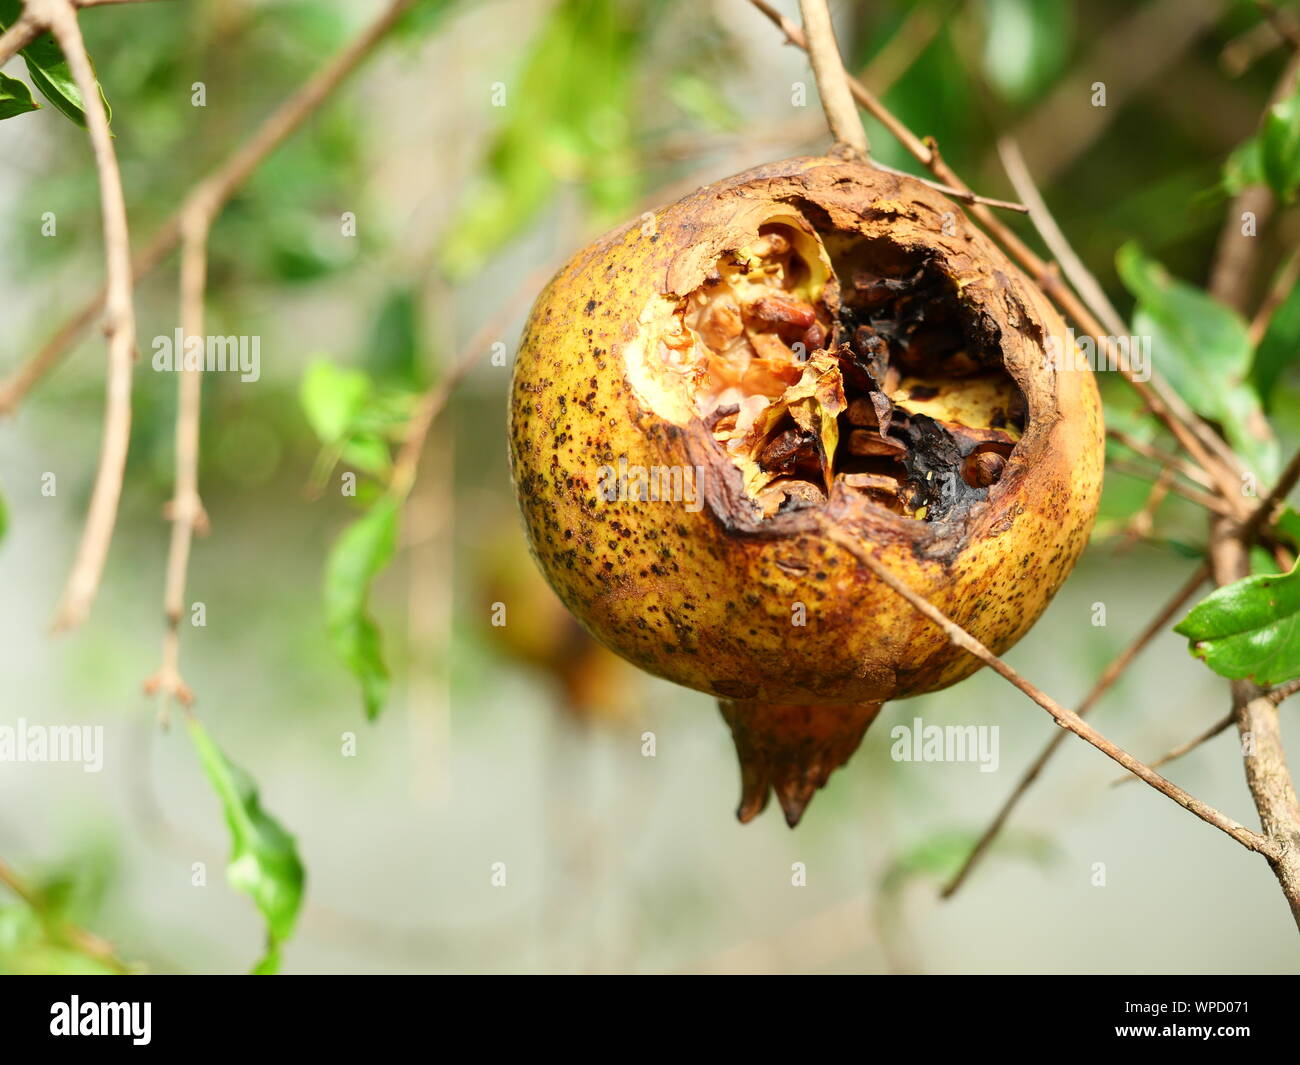 Pomegranate fruit that have been damaged by rodents, Fruit is torn and rotting Stock Photo